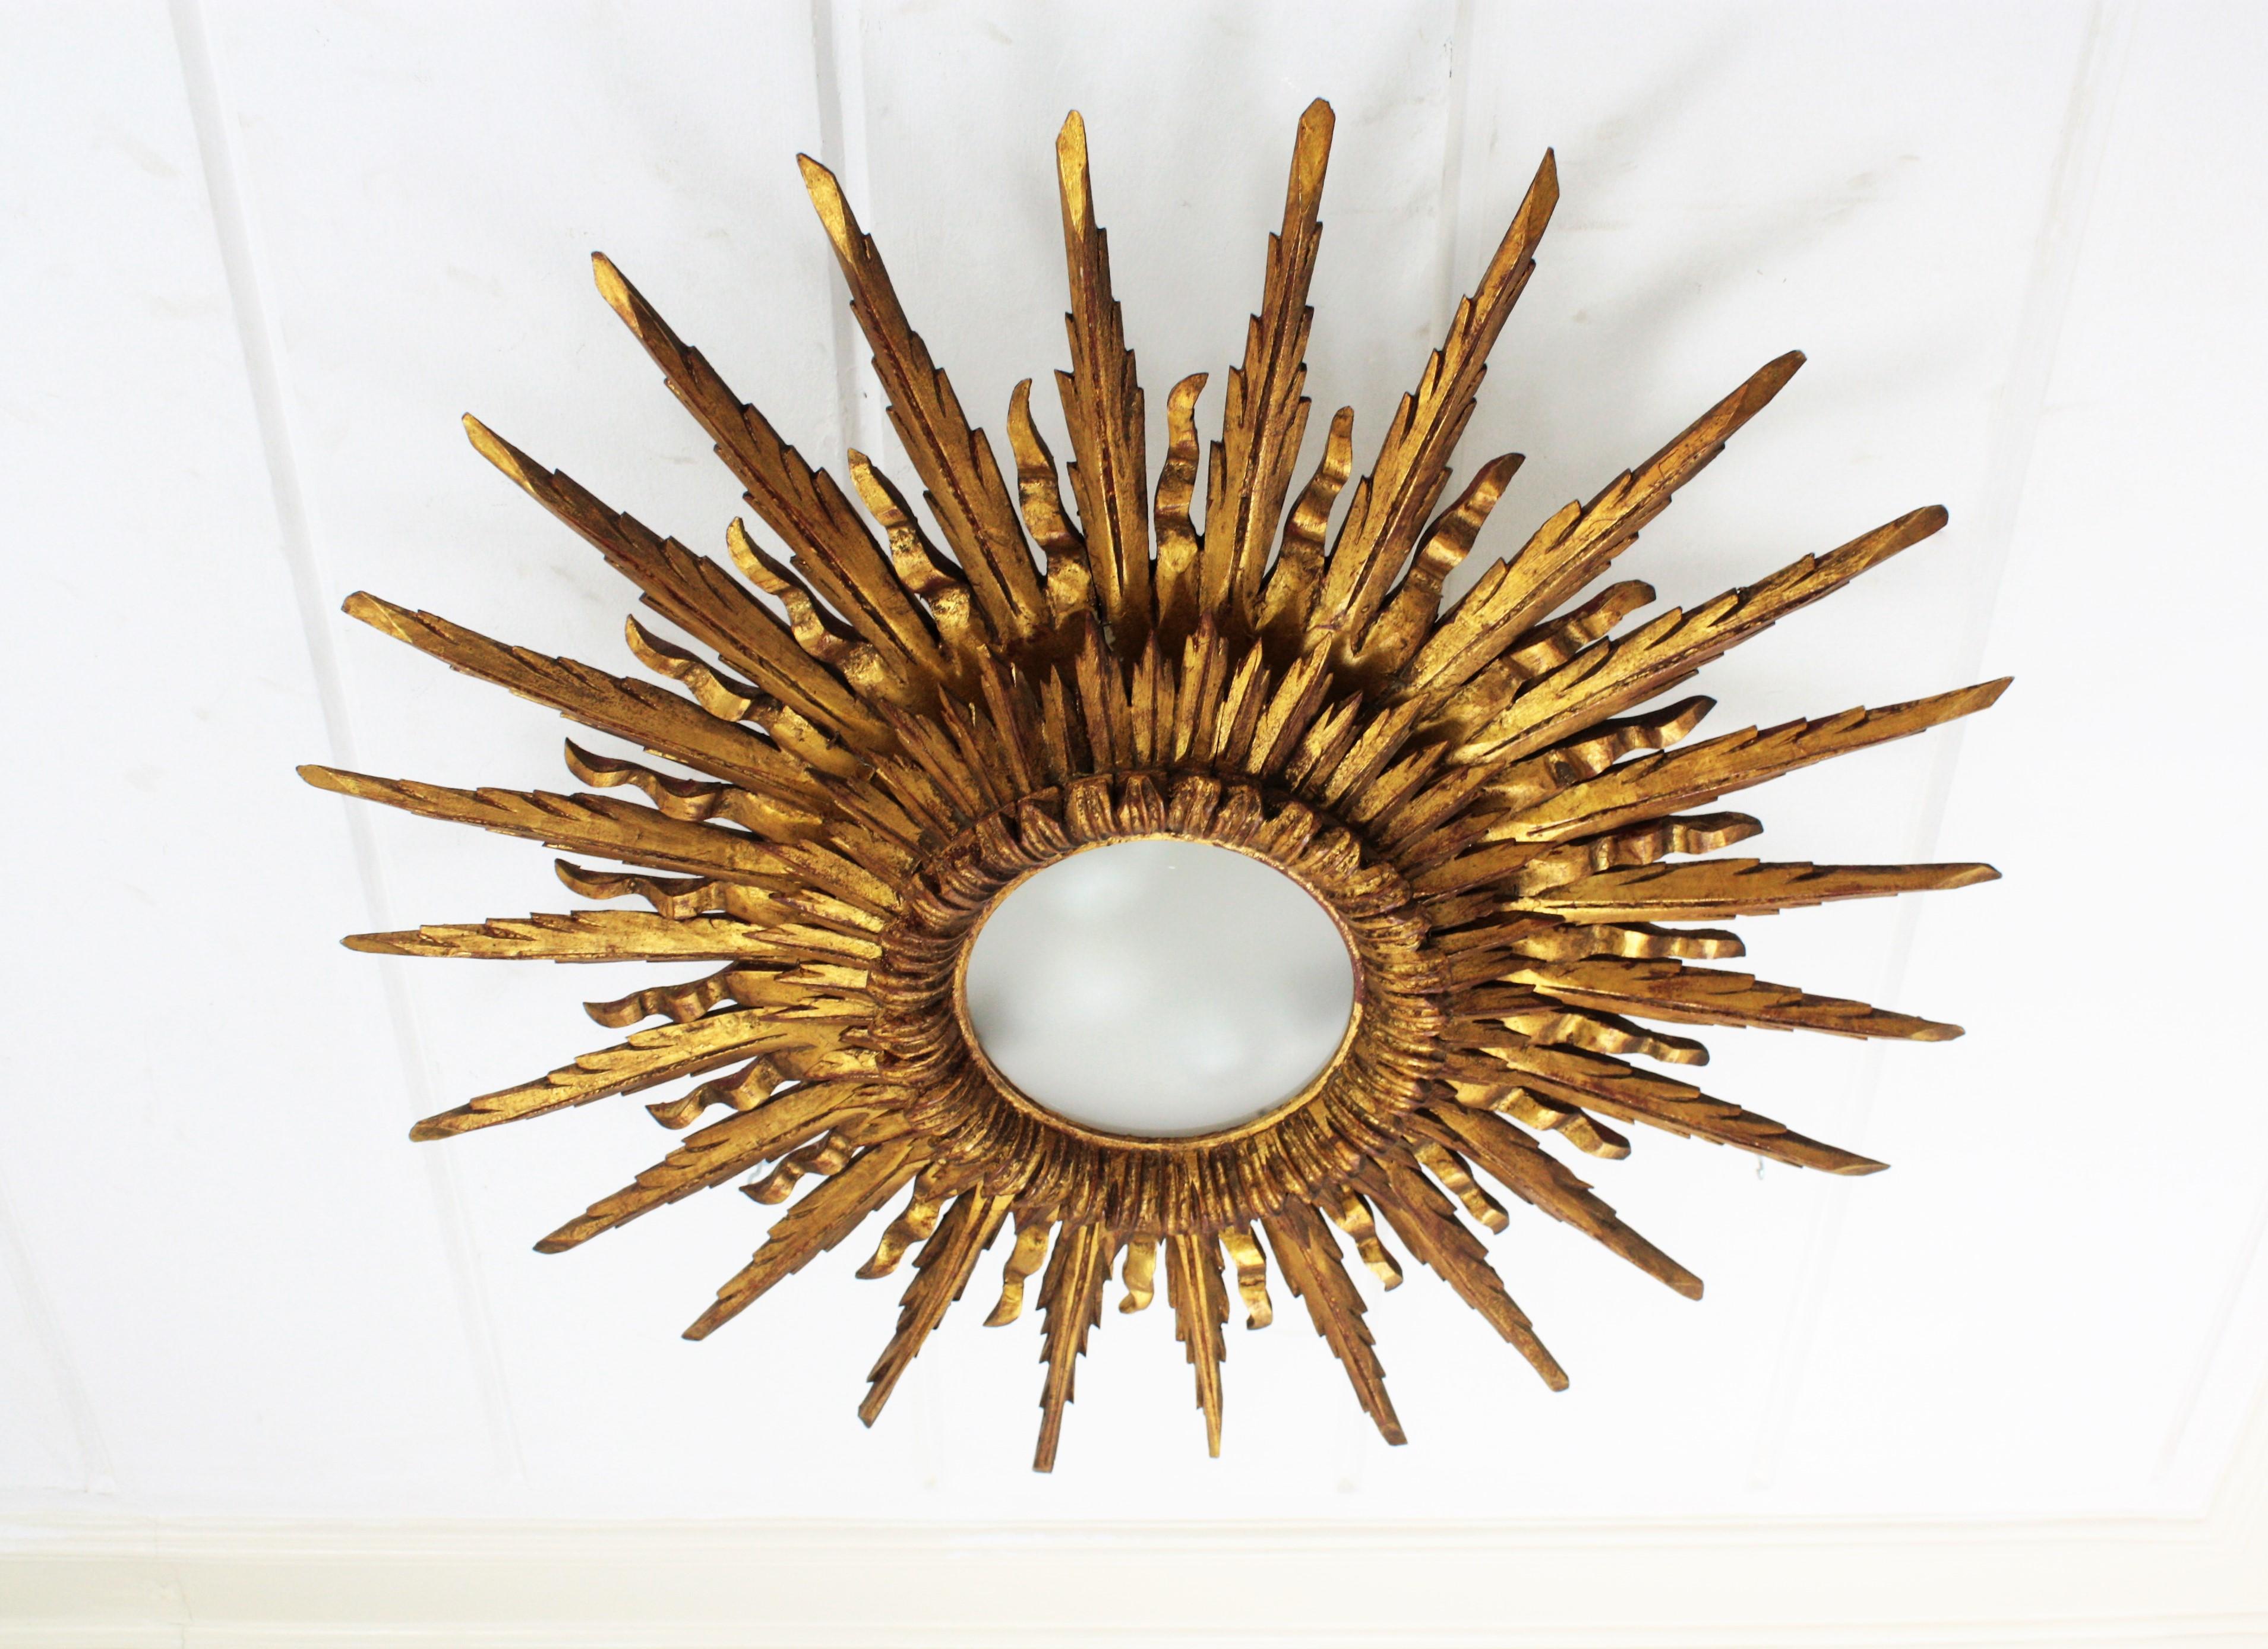 Outstanding giant sized sunburst flush mount or ceiling light fixture in Baroque style made in Spain, 1930s.
Its large size and the two layers of alternating short and large rays, make this piece gorgeous and highly decorative even more face to